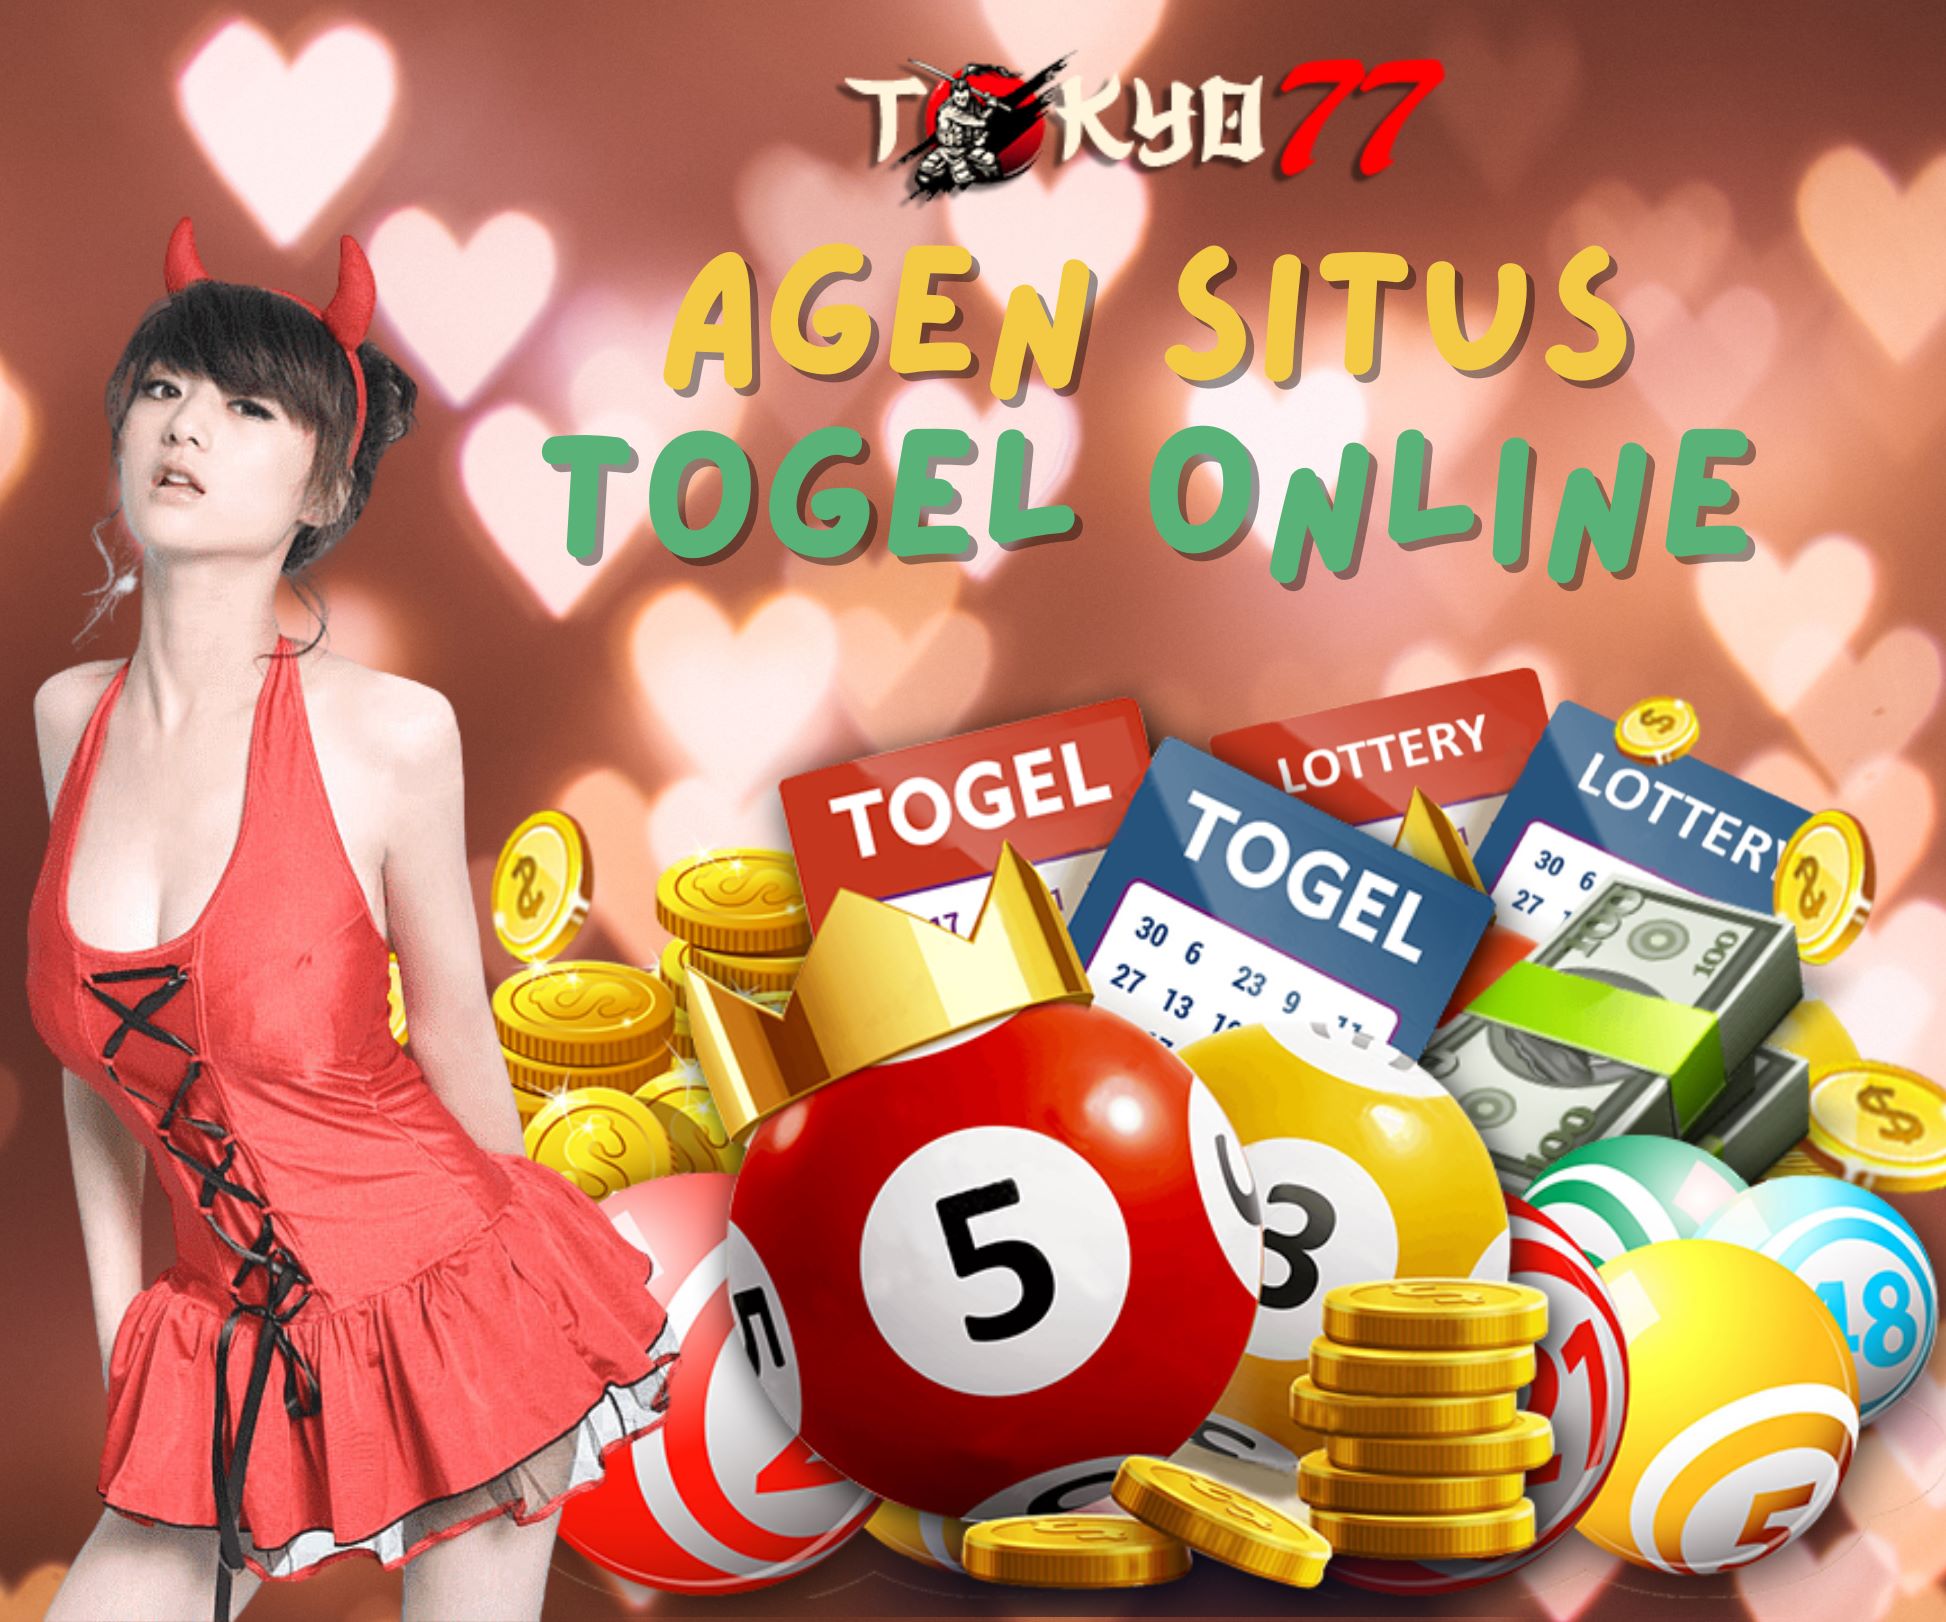 Turn your dreams into millions of rupiah from Togel Online